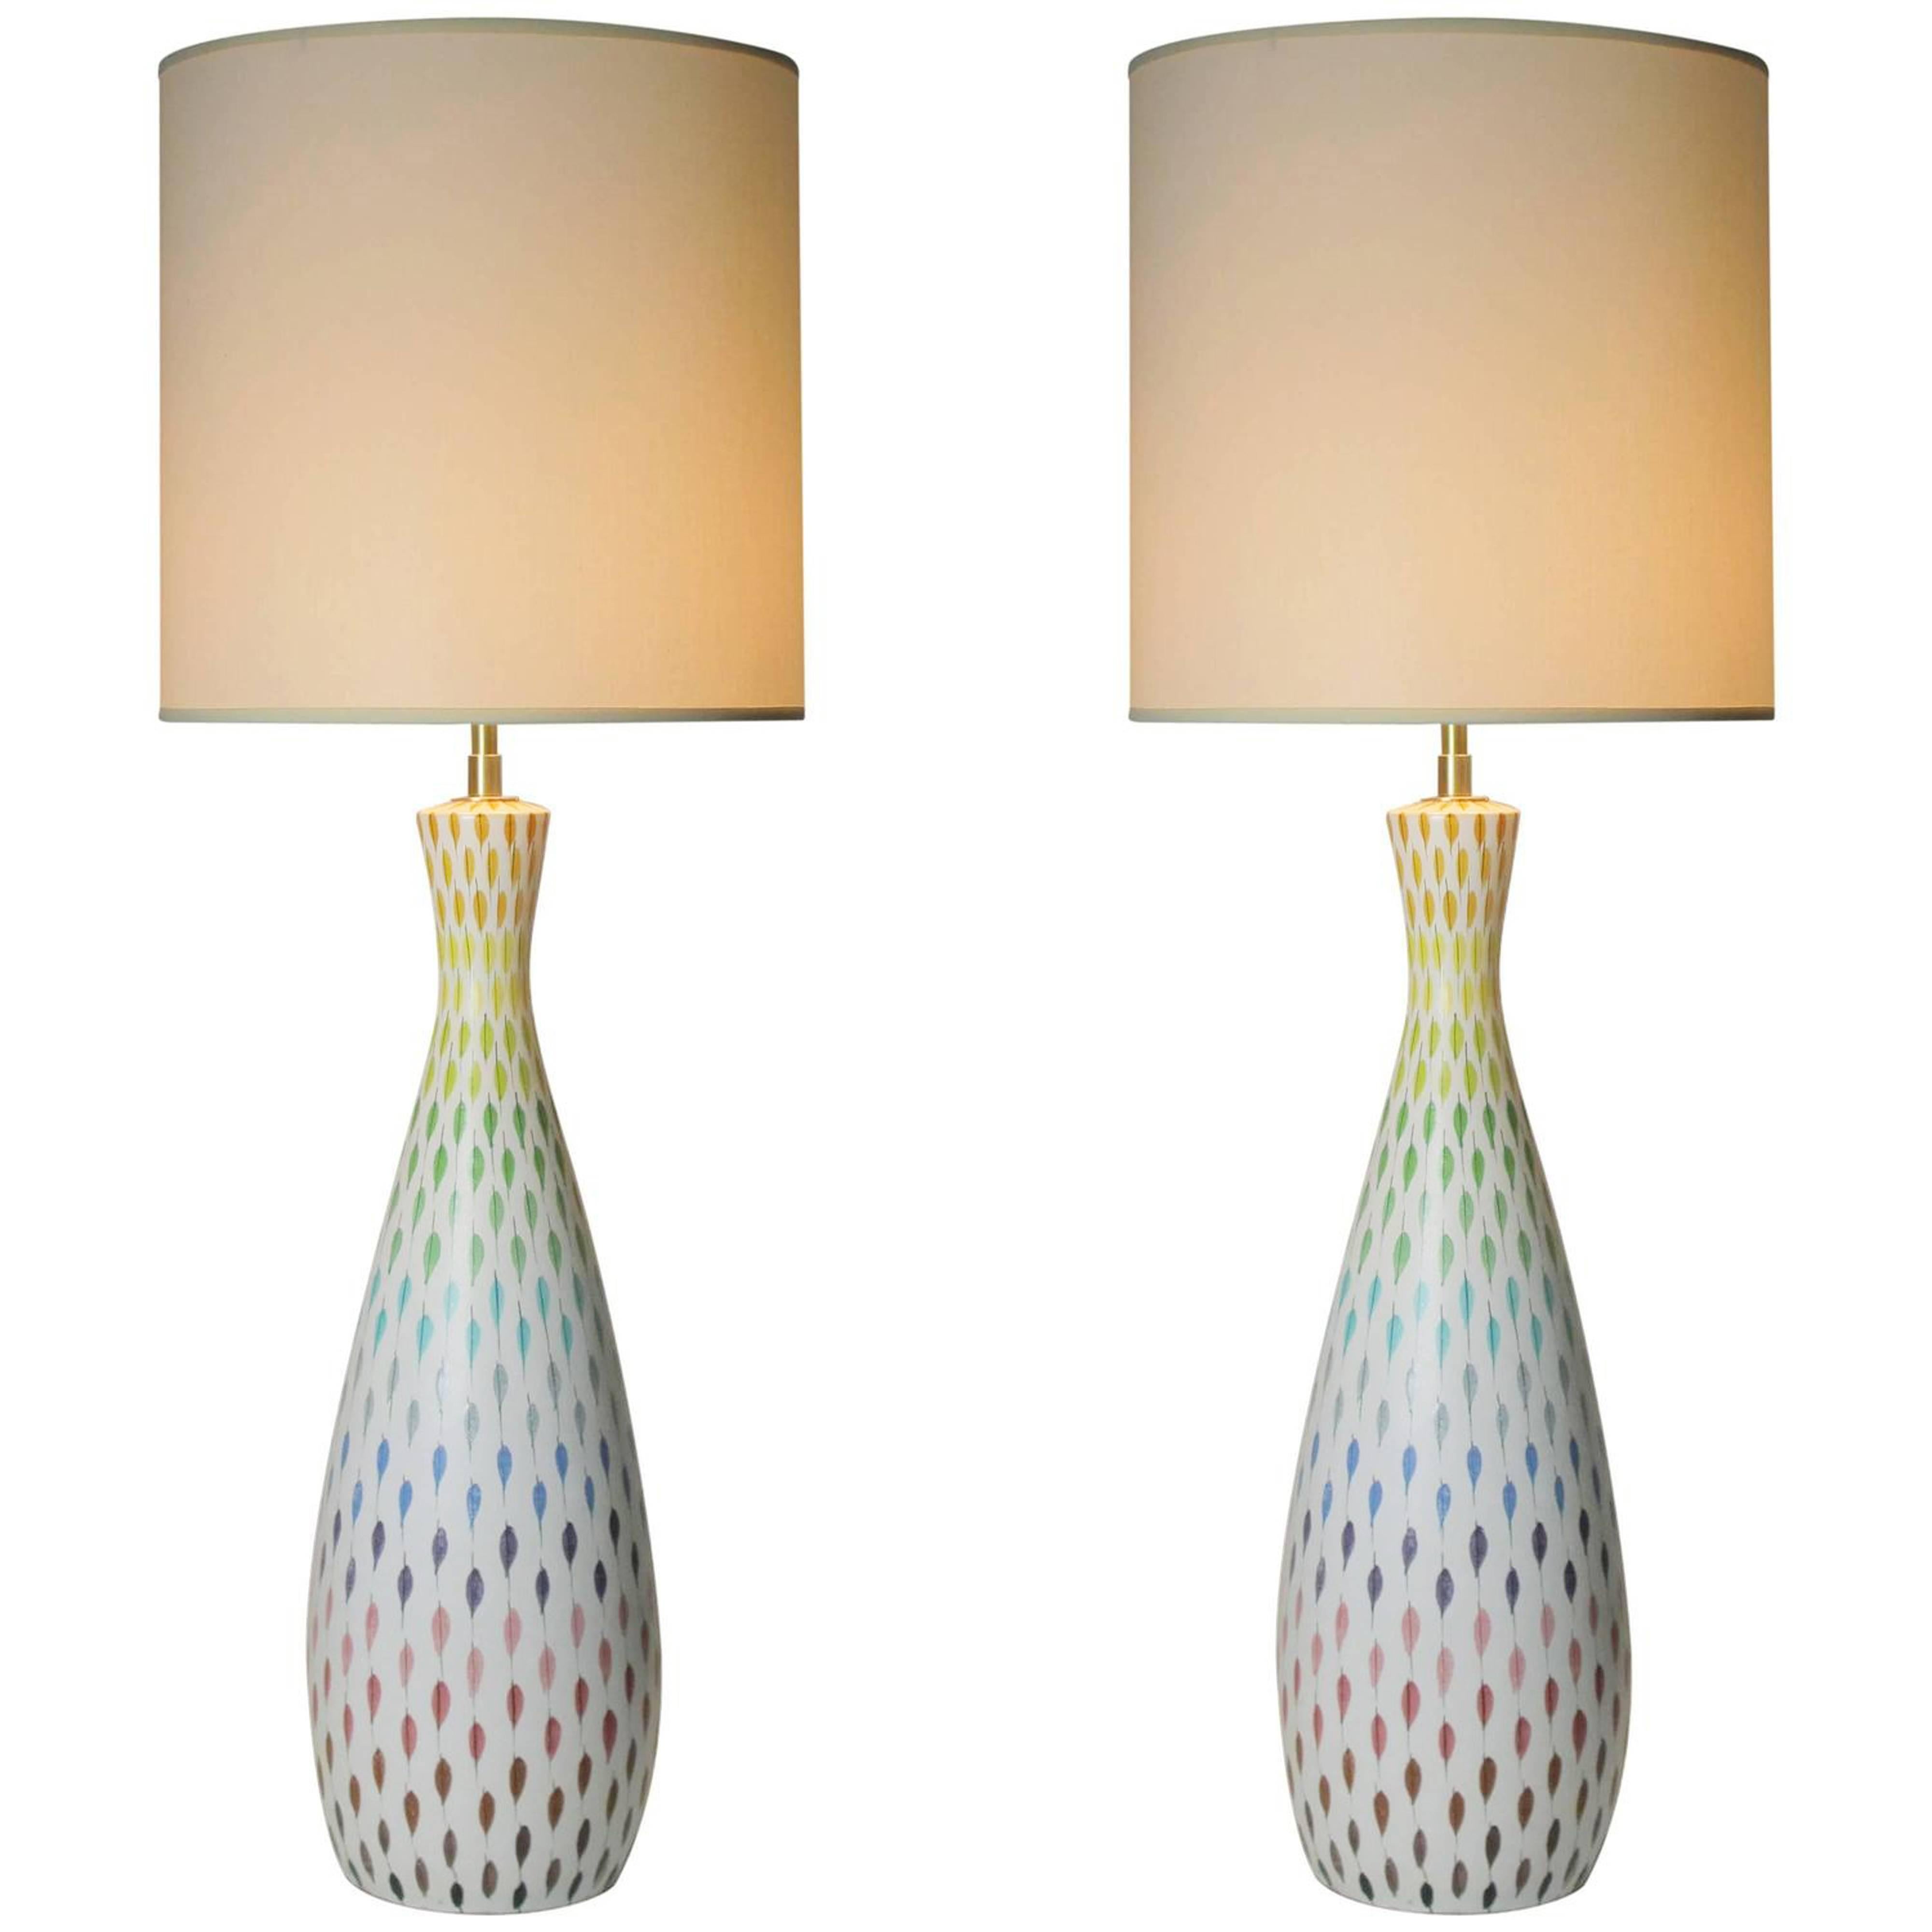 Pair of Large Multi-Colored Italian Ceramic Table Lamps by Bitossi